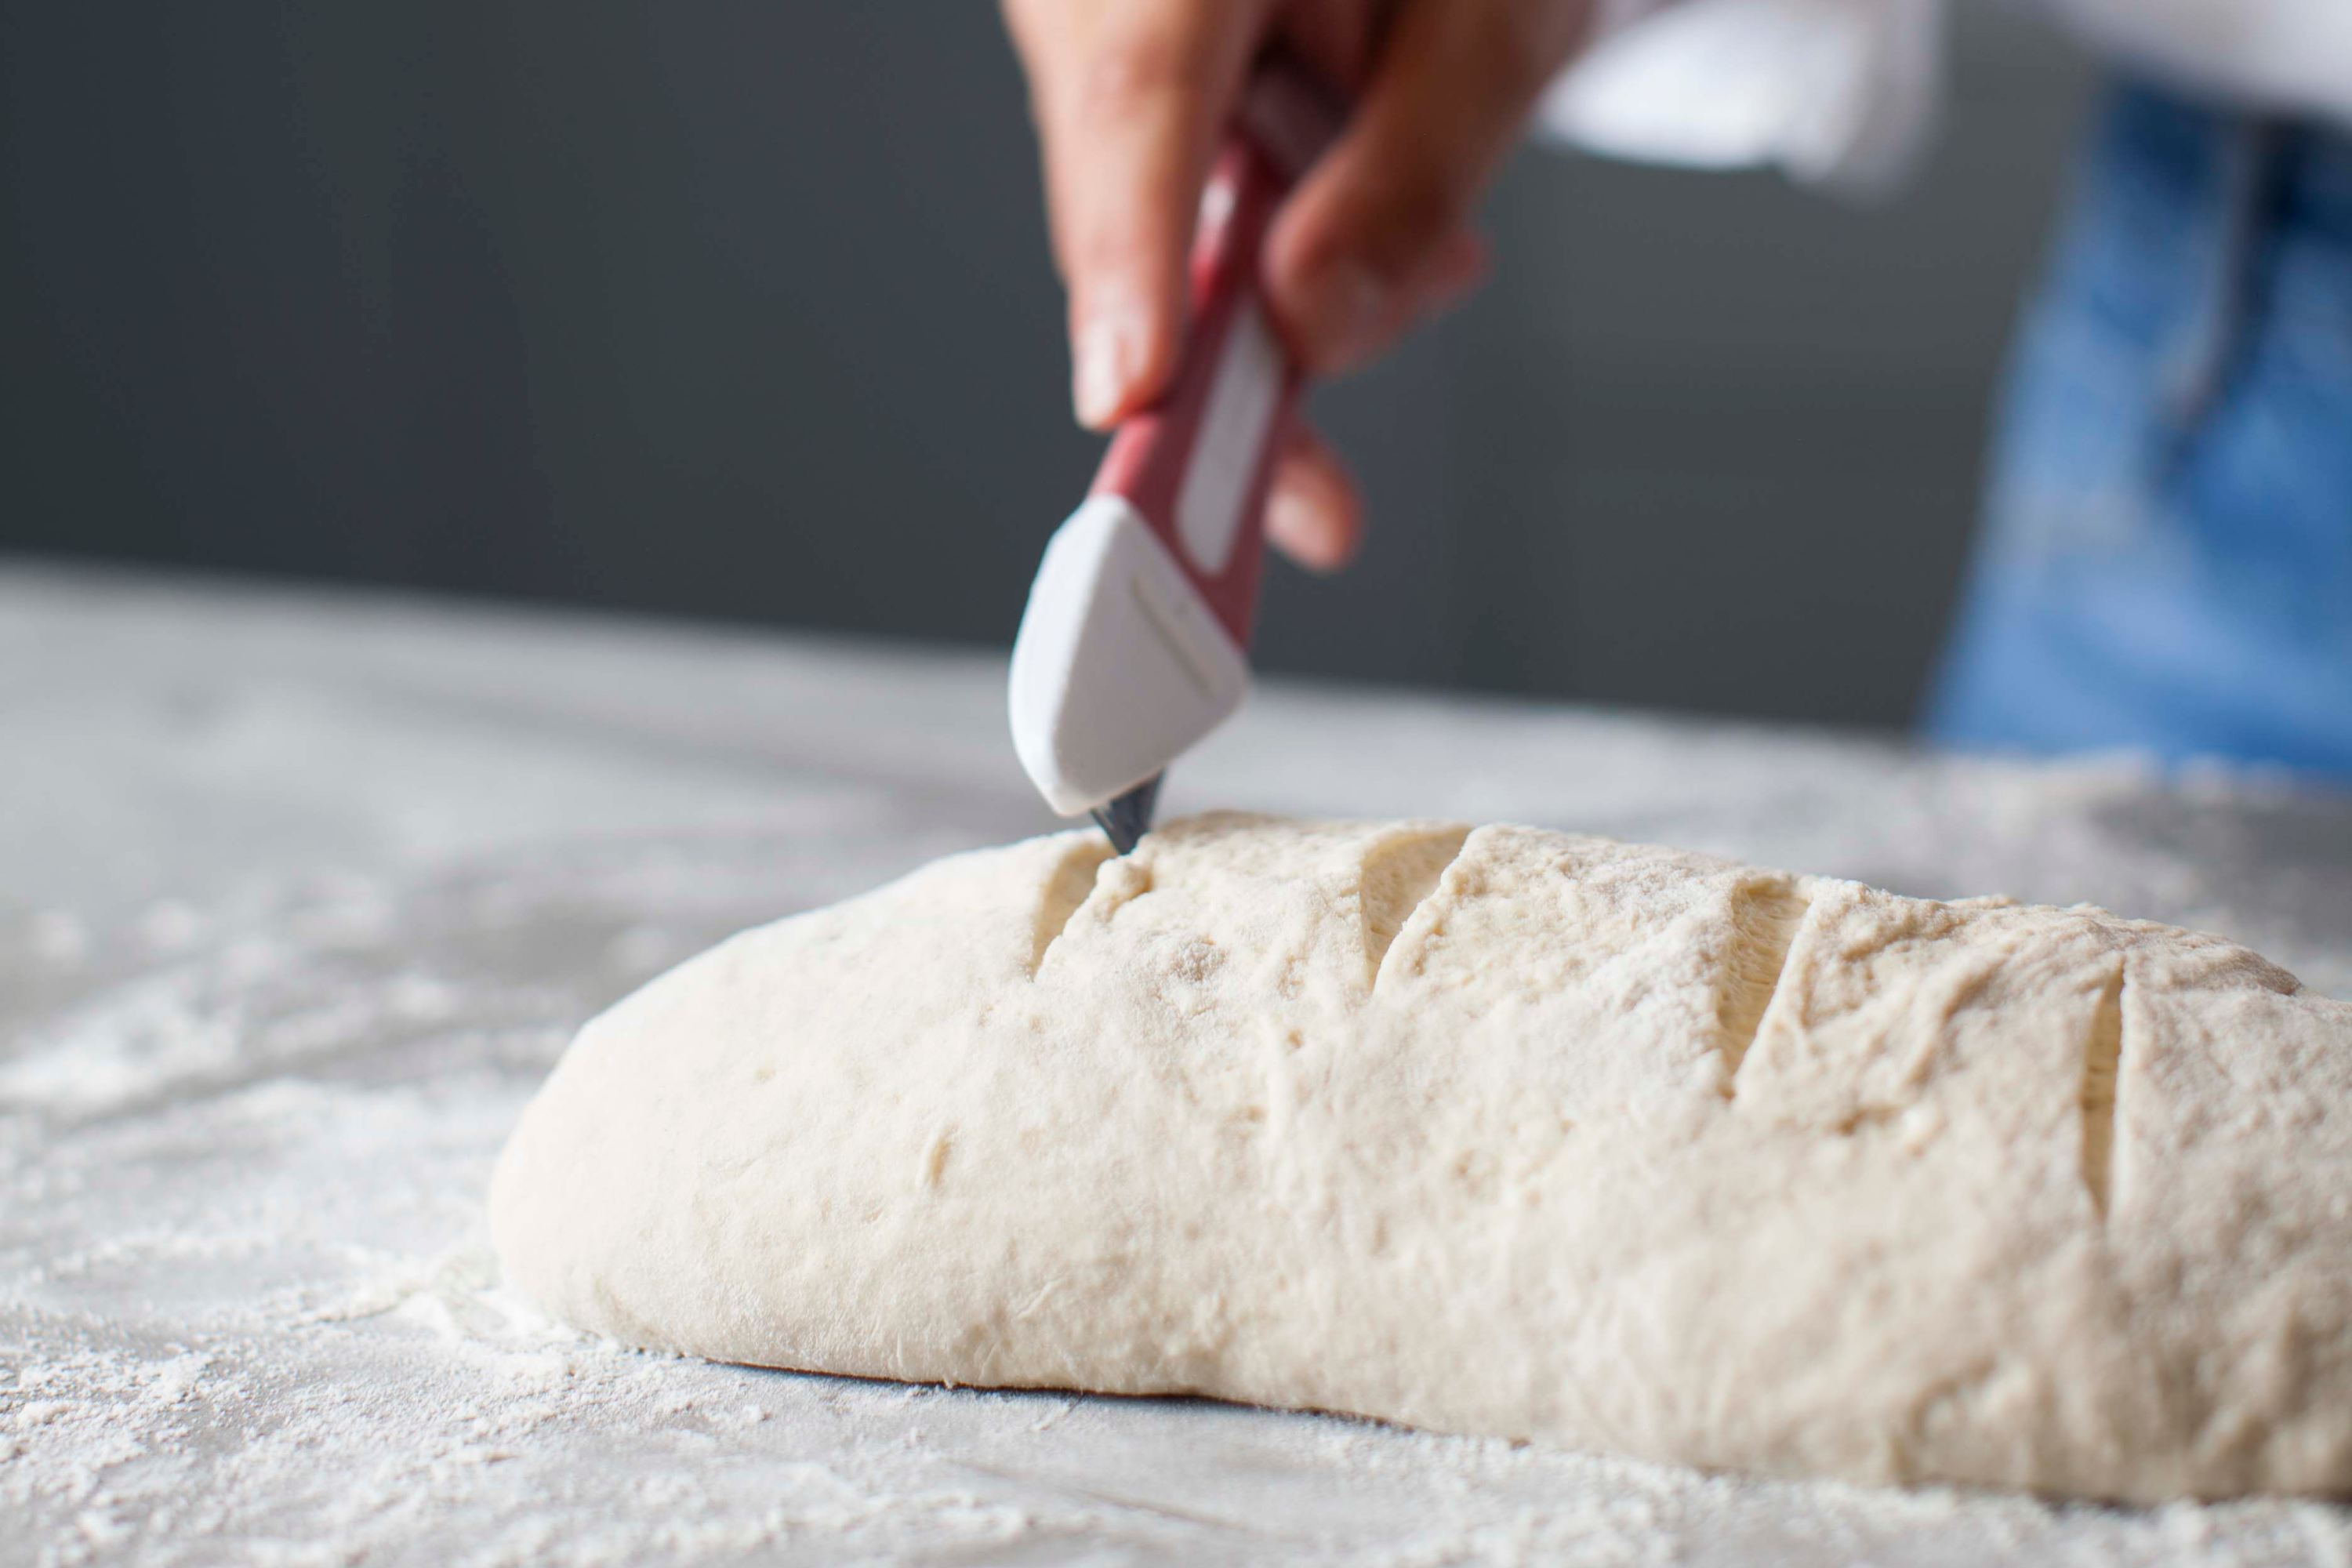 7 Tips For Scoring Your Dough